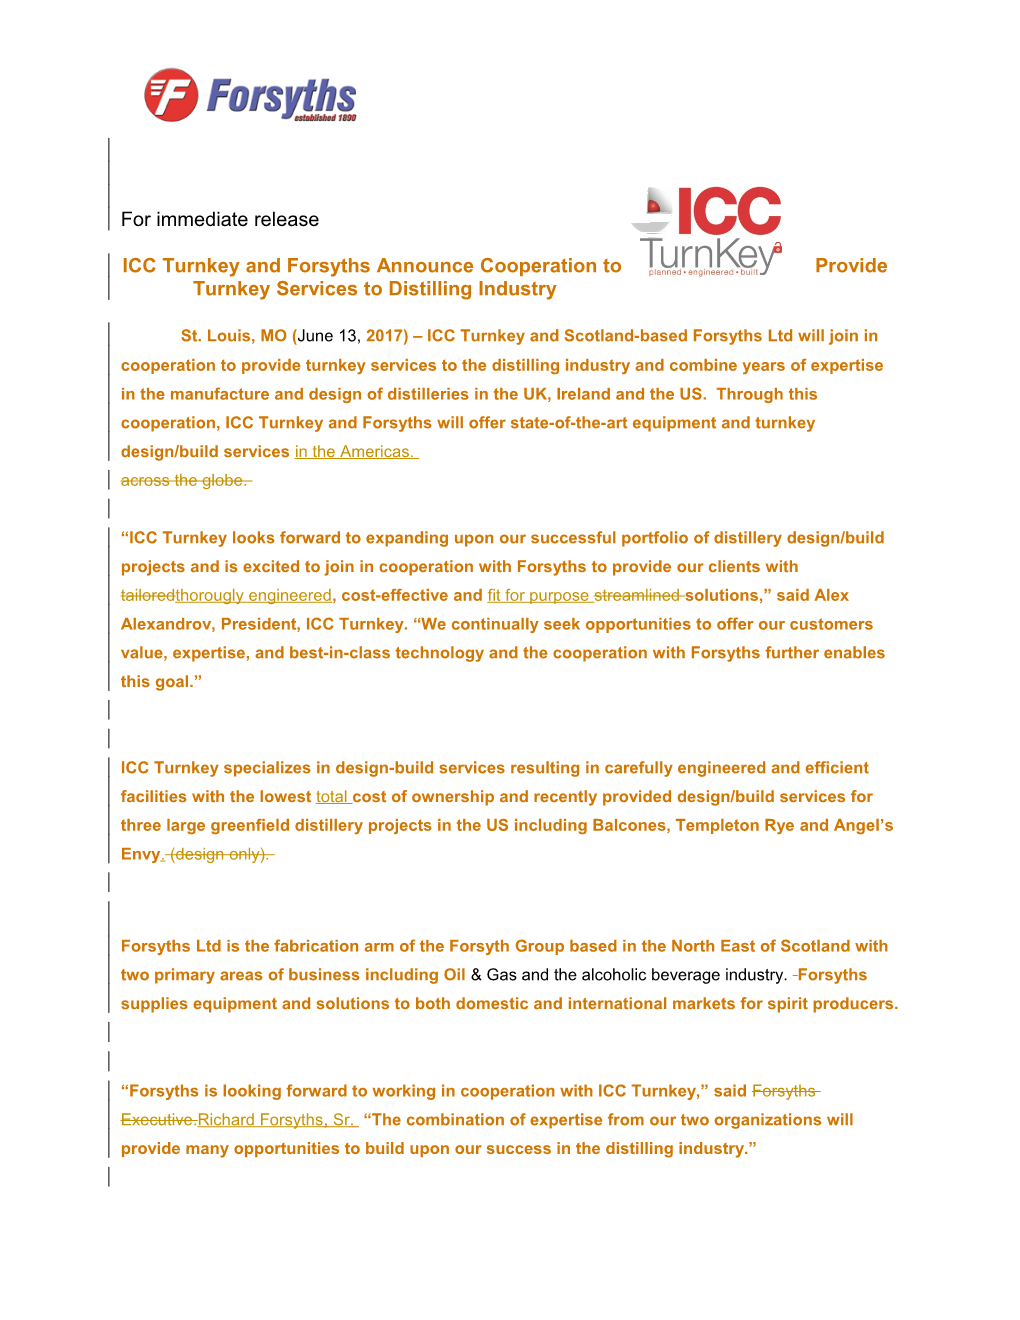 ICC Turnkey and Forsyths Announce Cooperation to Provide Turnkey Services to Distilling